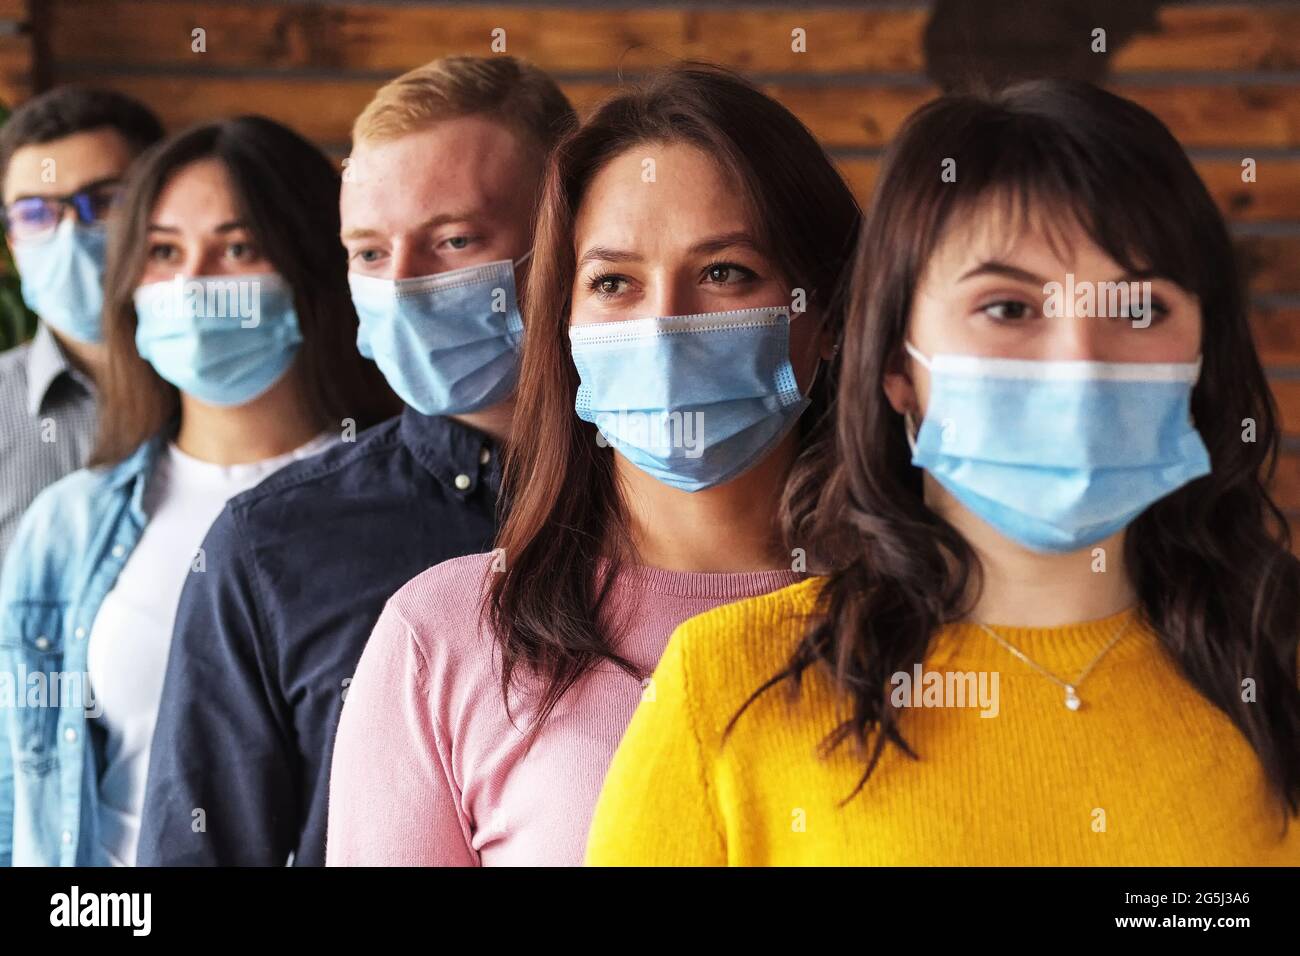 Crowd of young people wearing masks on their faces during the coronavirus pandemic - New normal masked millennials - New concept of normal life Stock Photo